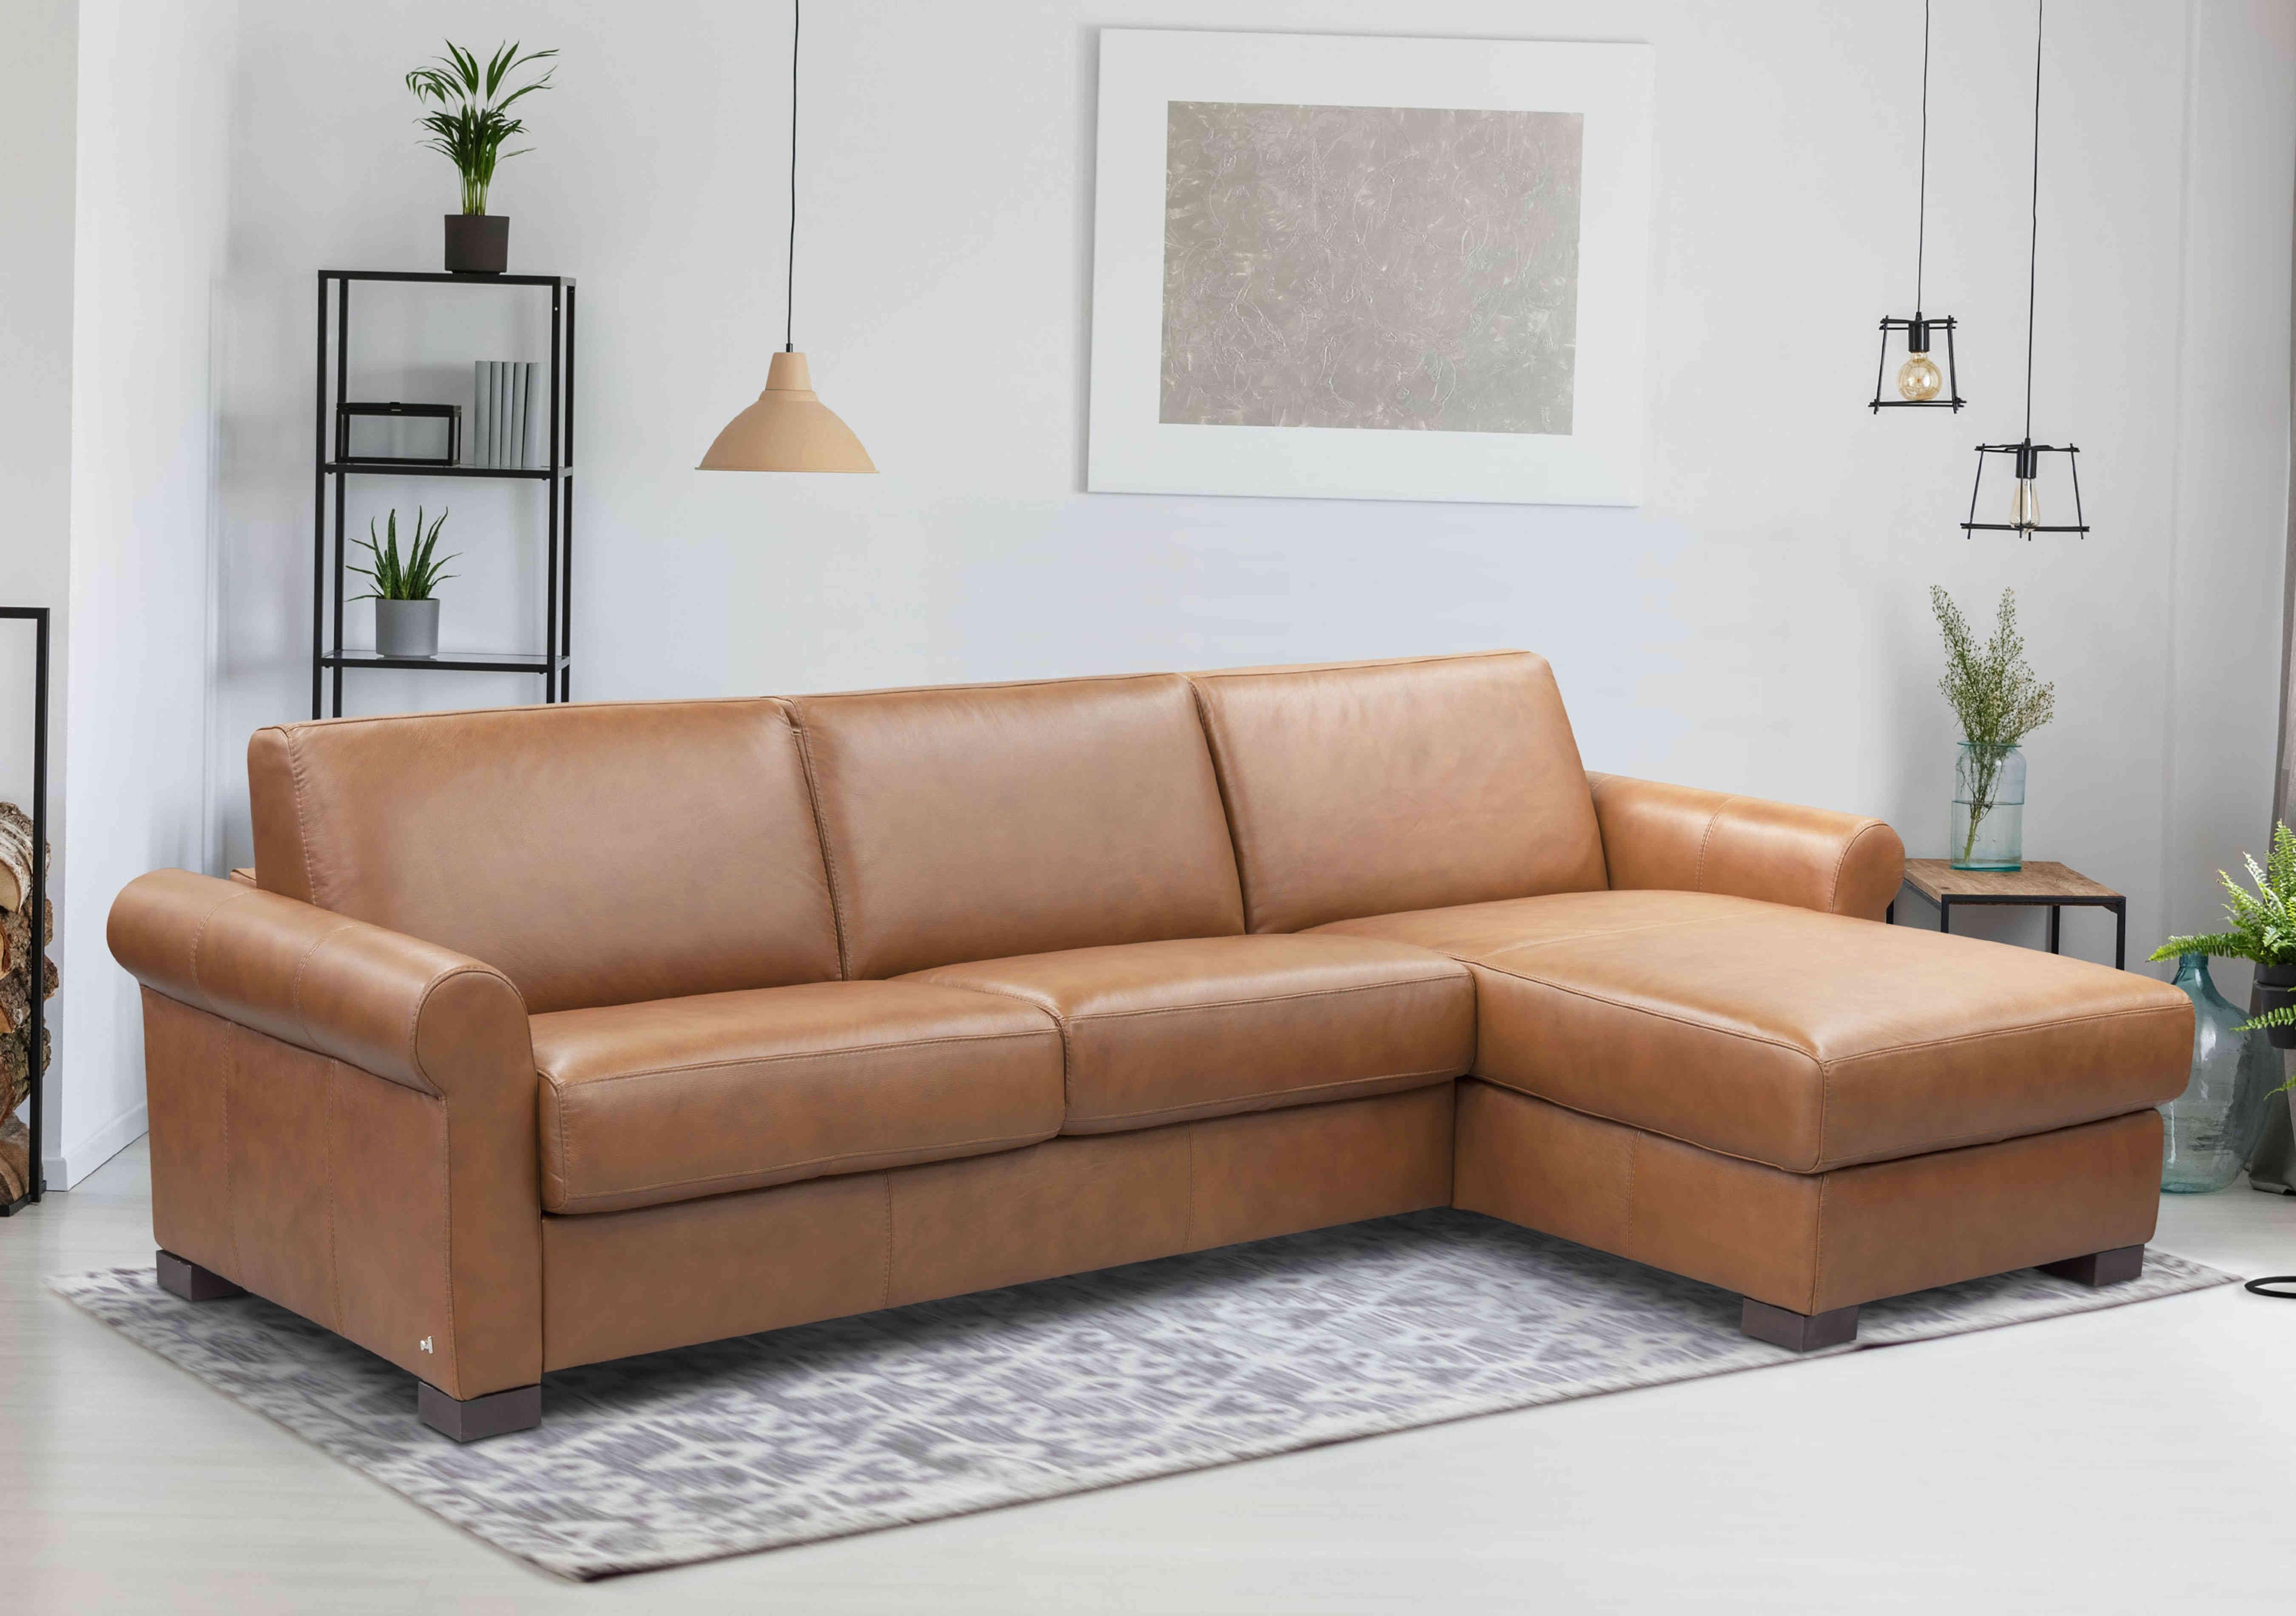 Alcova 3 Seater Leather Sofa Bed with Storage Chaise with Scroll Arms in  on Furniture Village